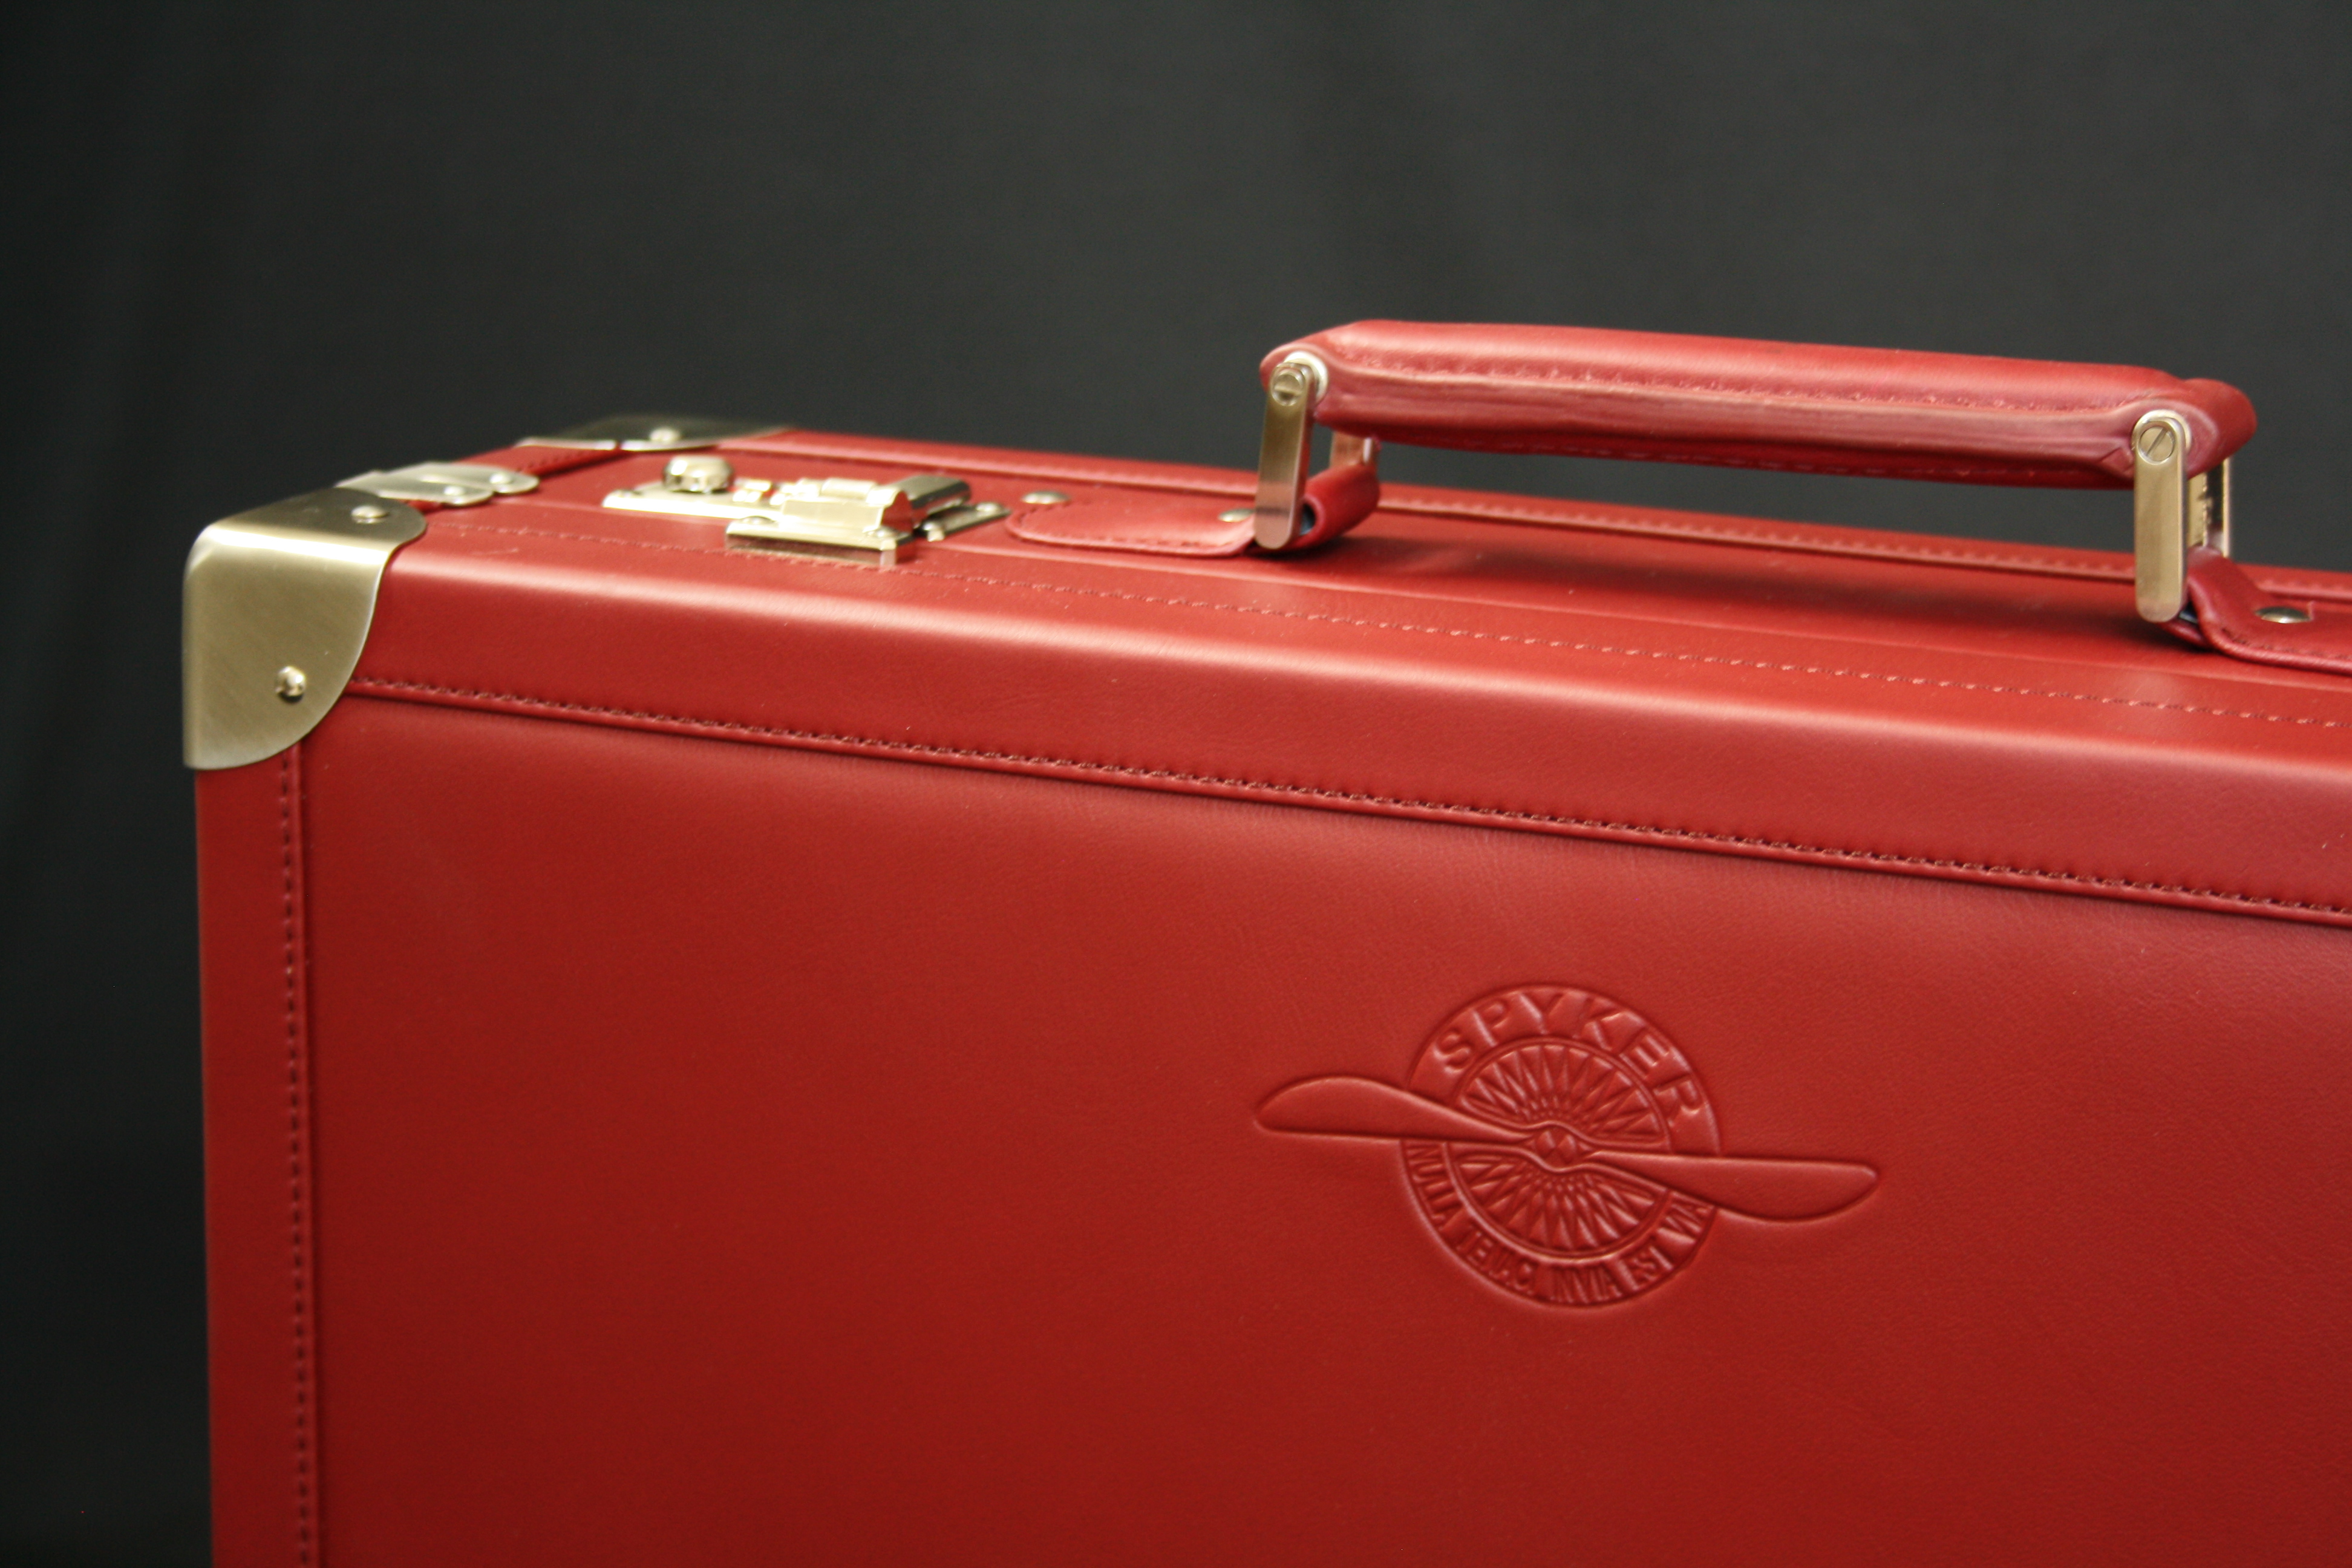 Spyker fitted luggage